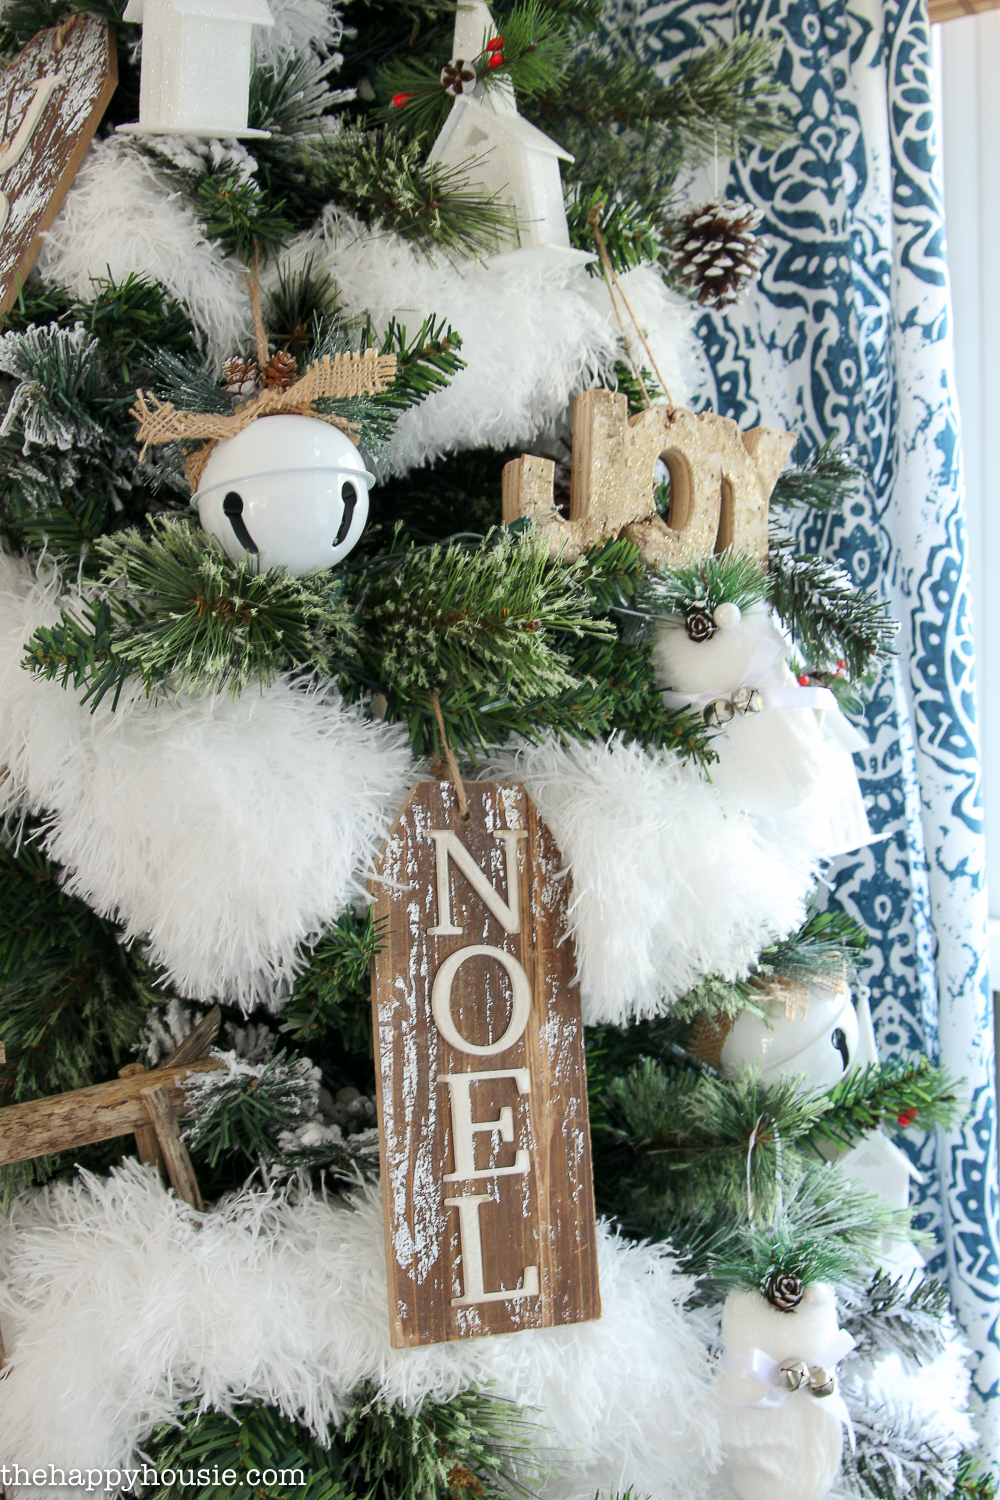 Wooden signs adorn the tree.